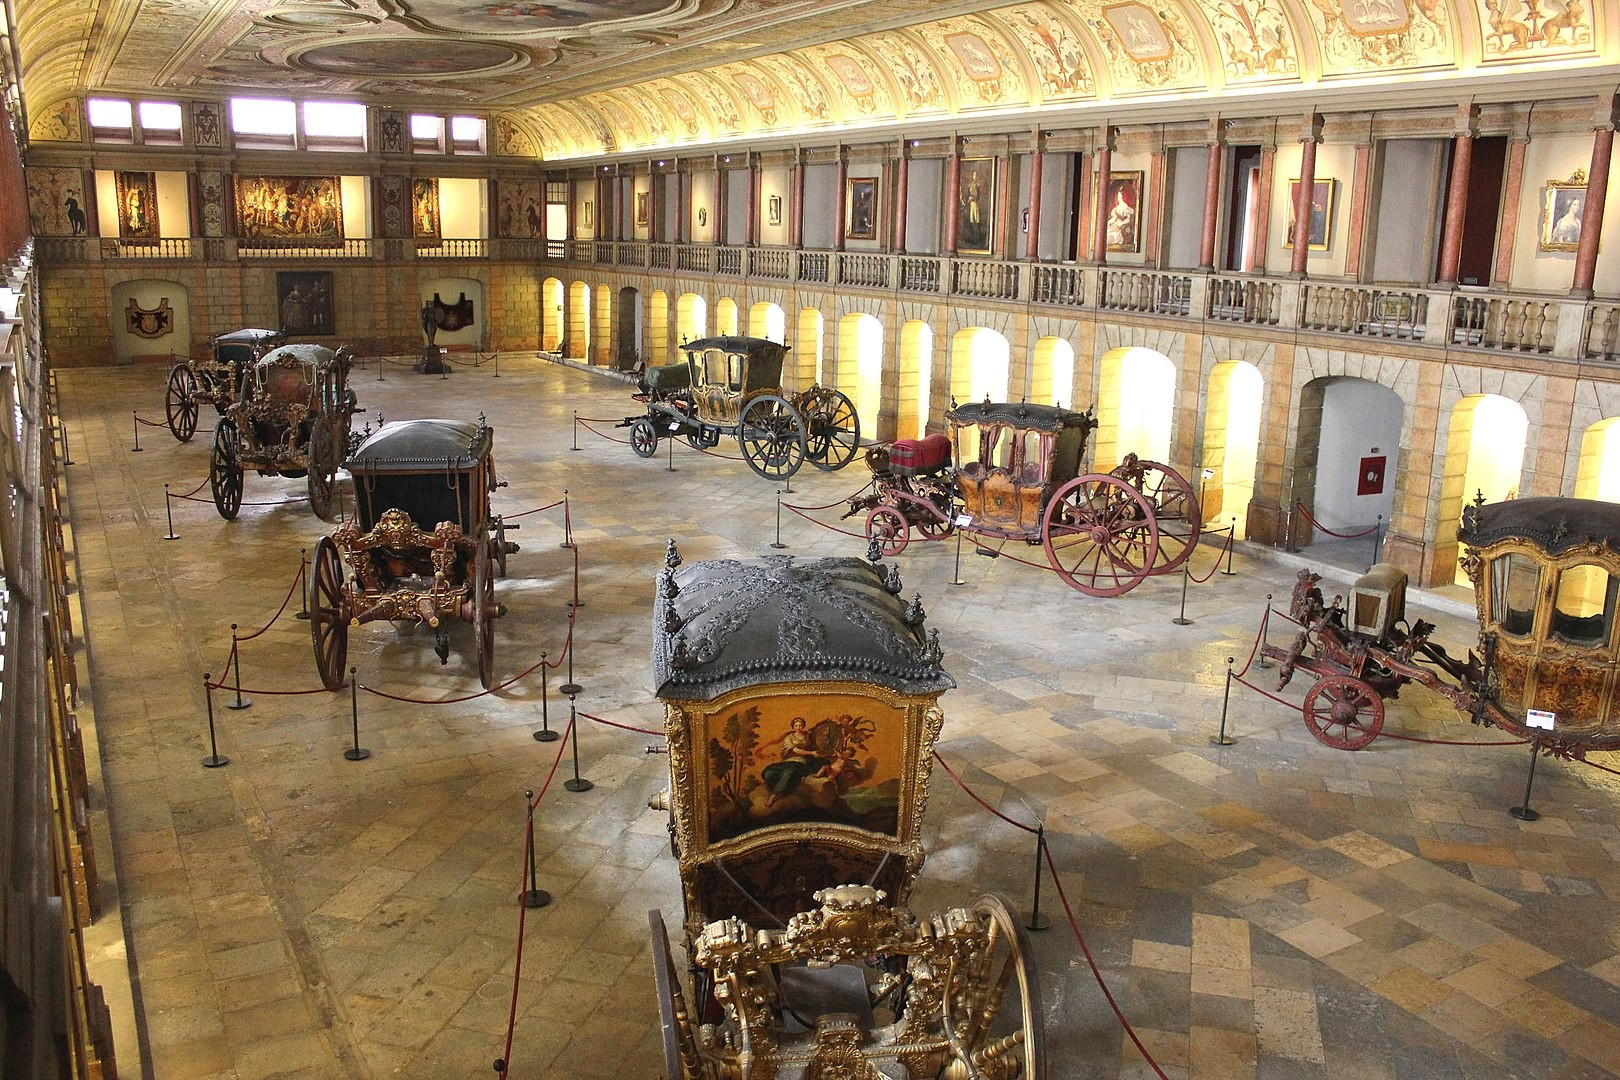 By Pedro Beltrão - DGPC/Museu dos Coches, CC BY 4.0, https://commons.wikimedia.org/w/index.php?curid=76385744